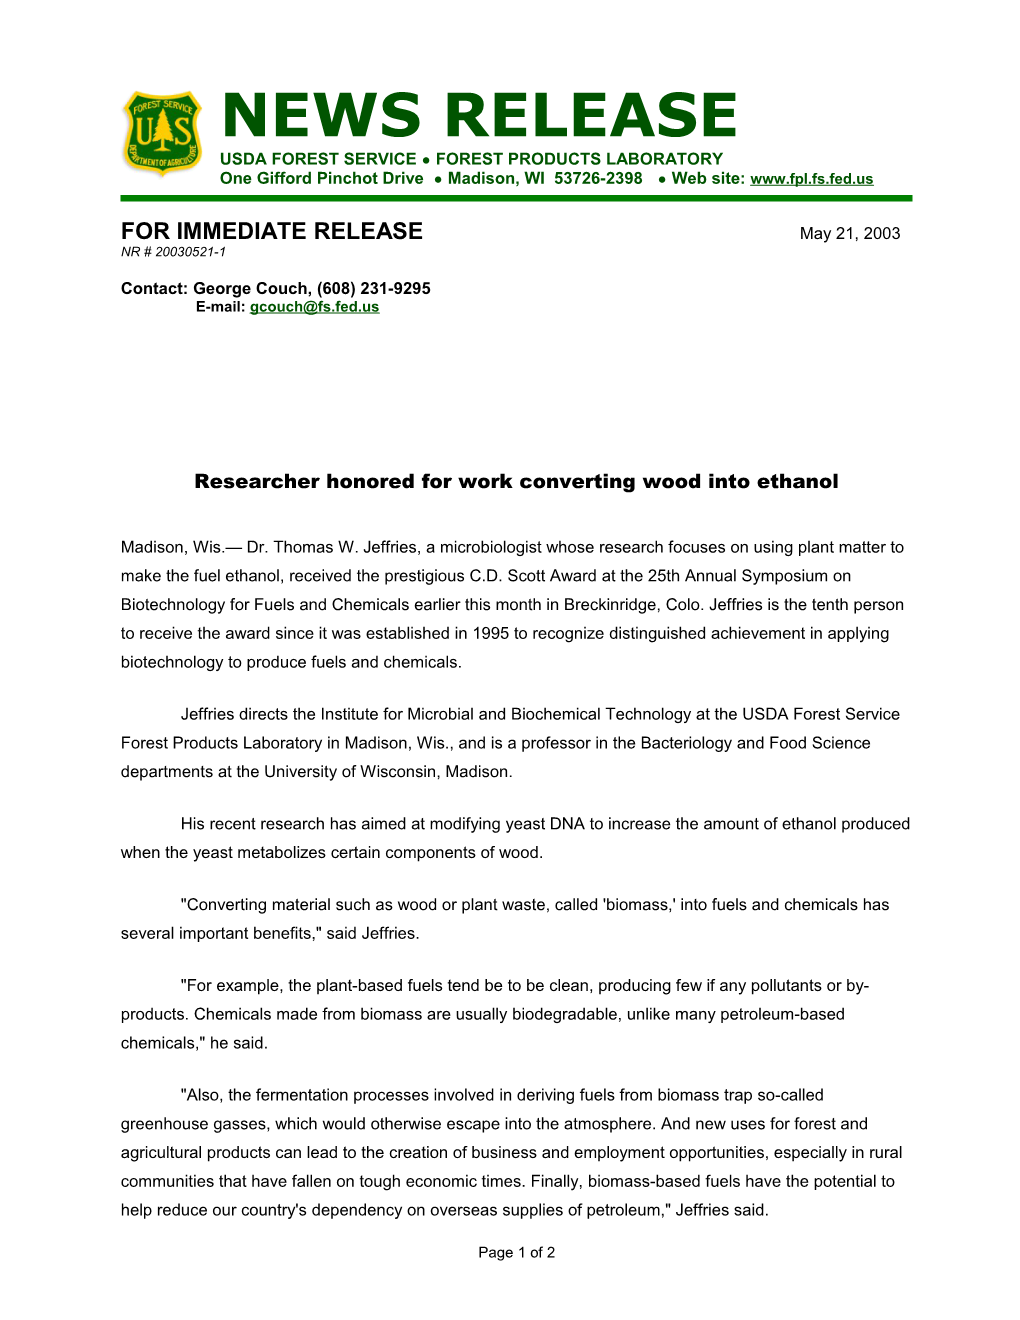 News Release Researcher Honored for Work Converting Wood Into Ethanol